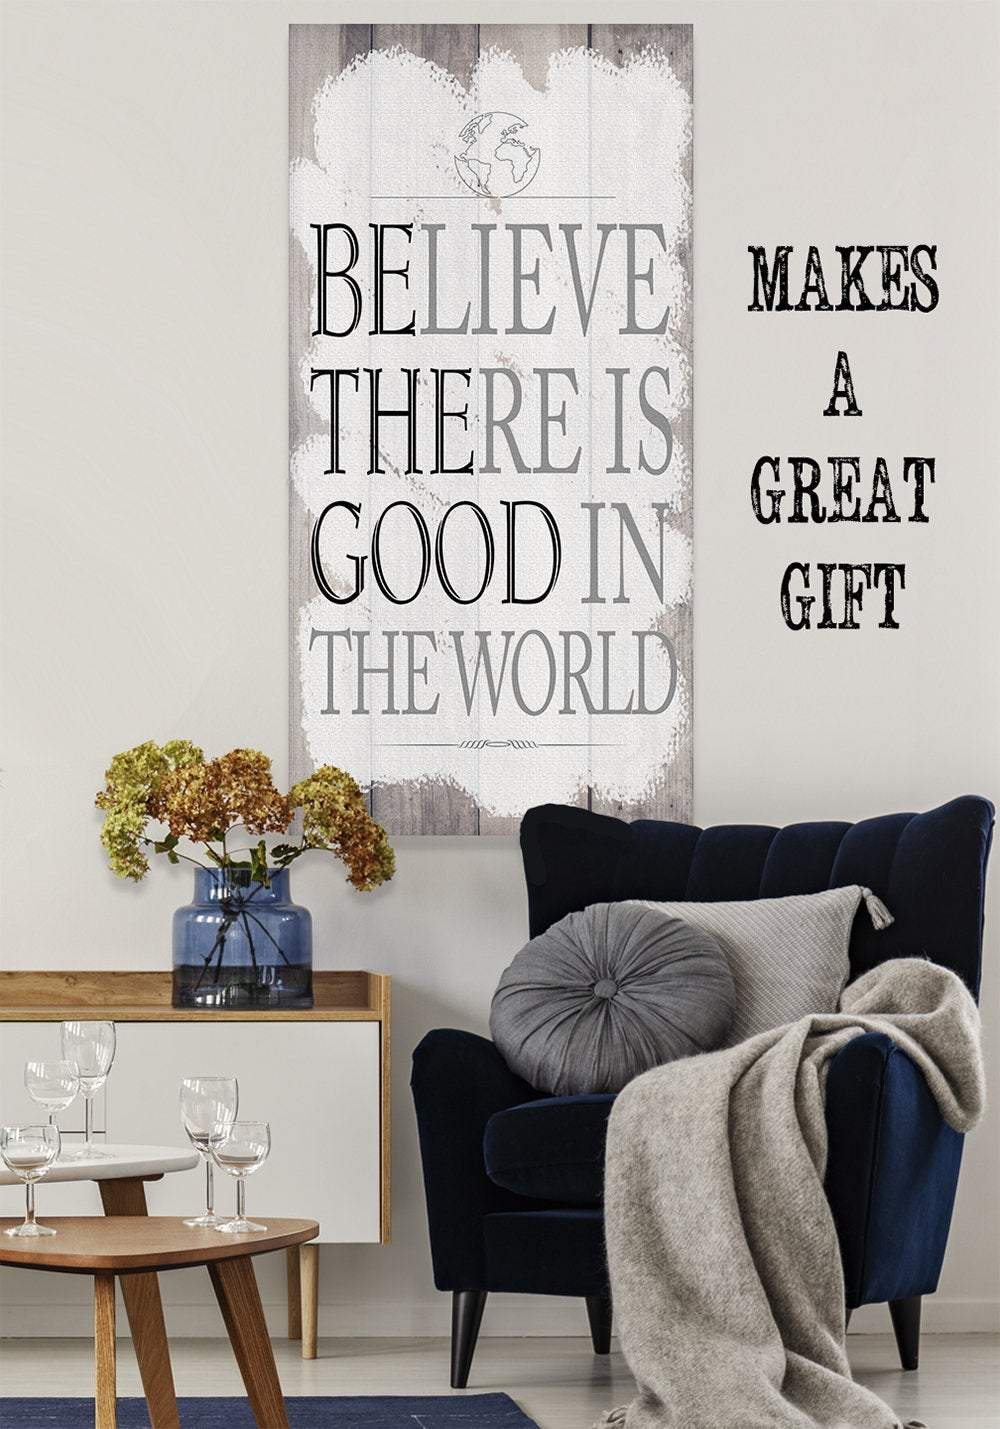 Believe There Is Good - Canvas | Lone Star Art.